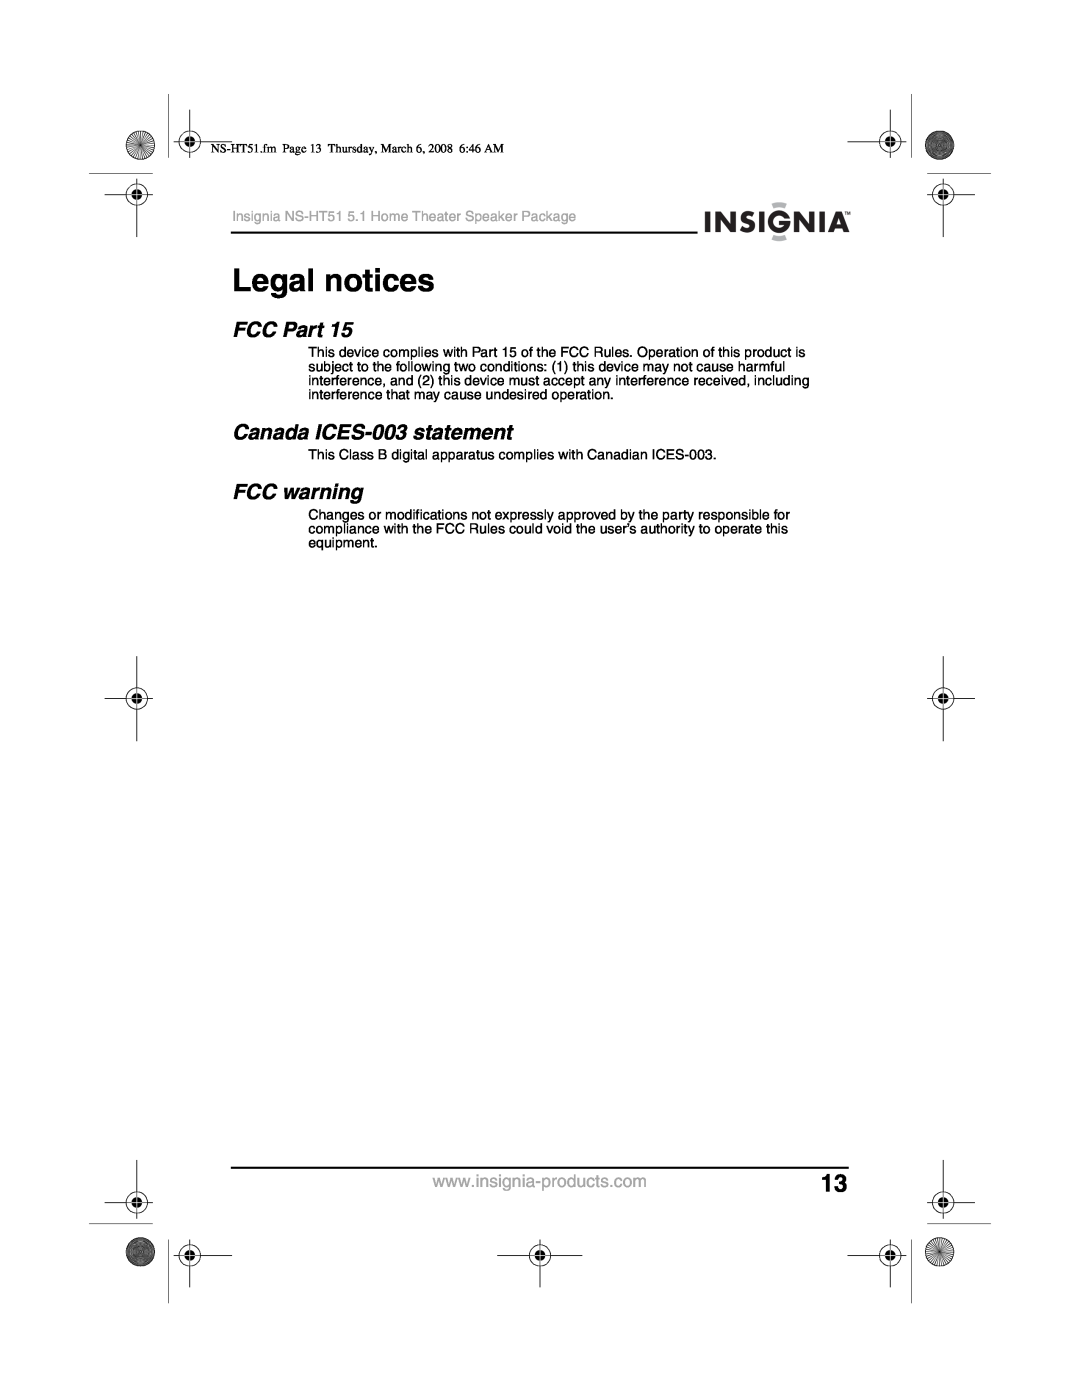 Insignia NS-HT51 manual Legal notices, FCC Part, Canada ICES-003statement, FCC warning 